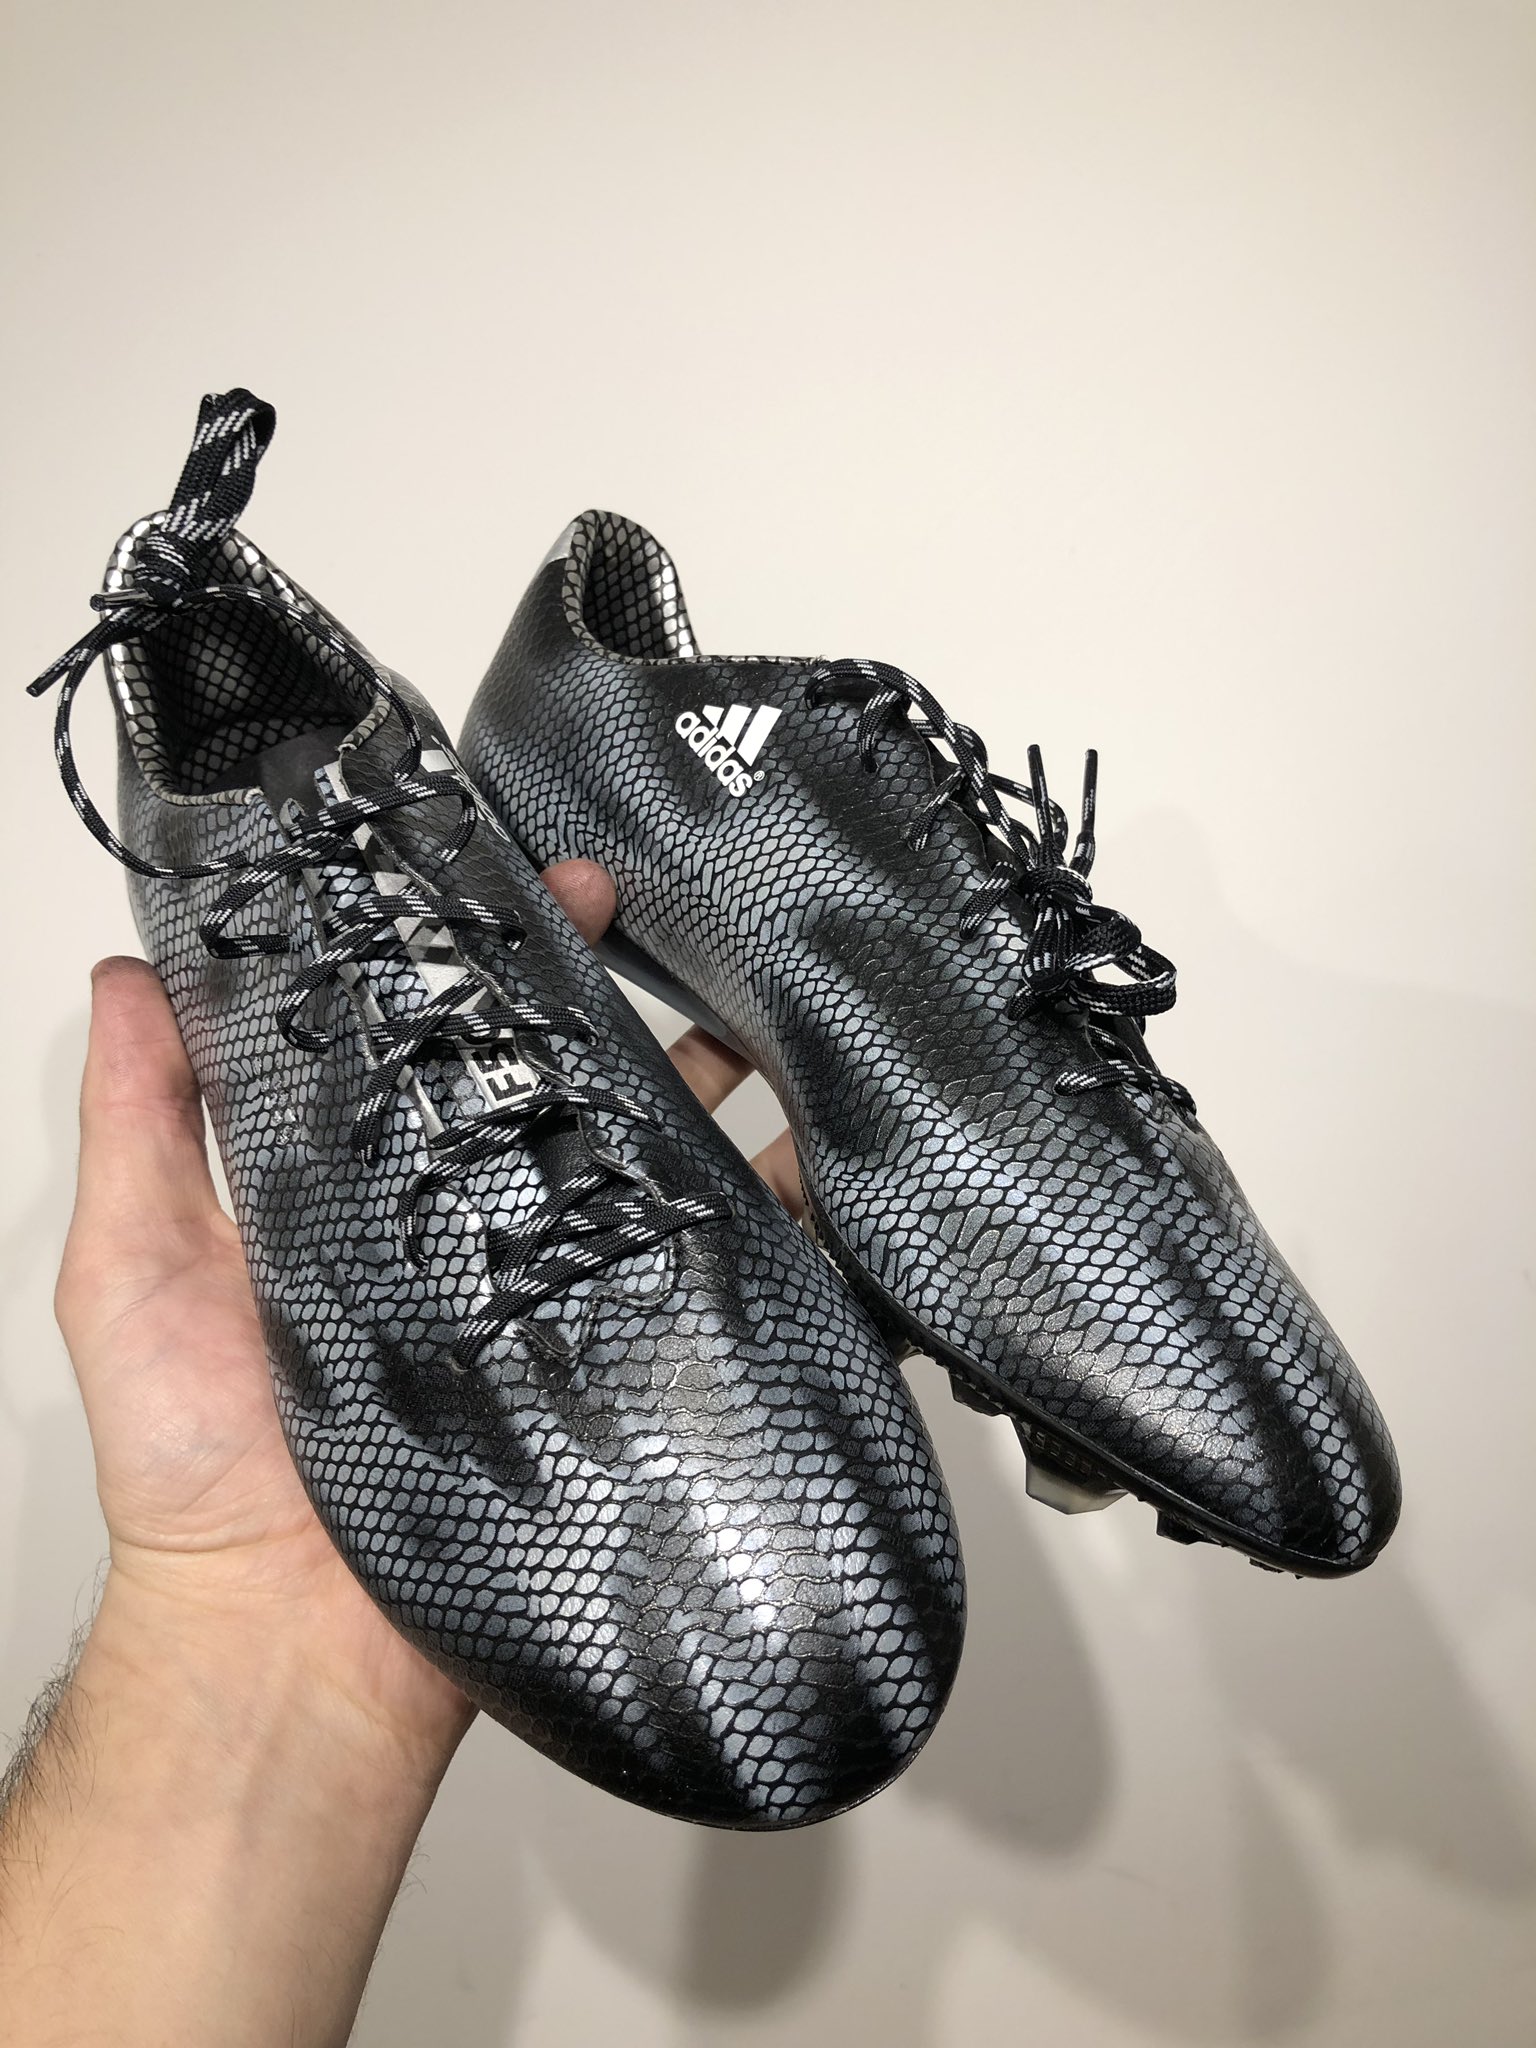 tootsboots Twitter: "2015 Adidas F50 Adizero. UK9. Just £99.99 including delivery to UK! #tootsboots https://t.co/jyuwJBAjyt" / Twitter